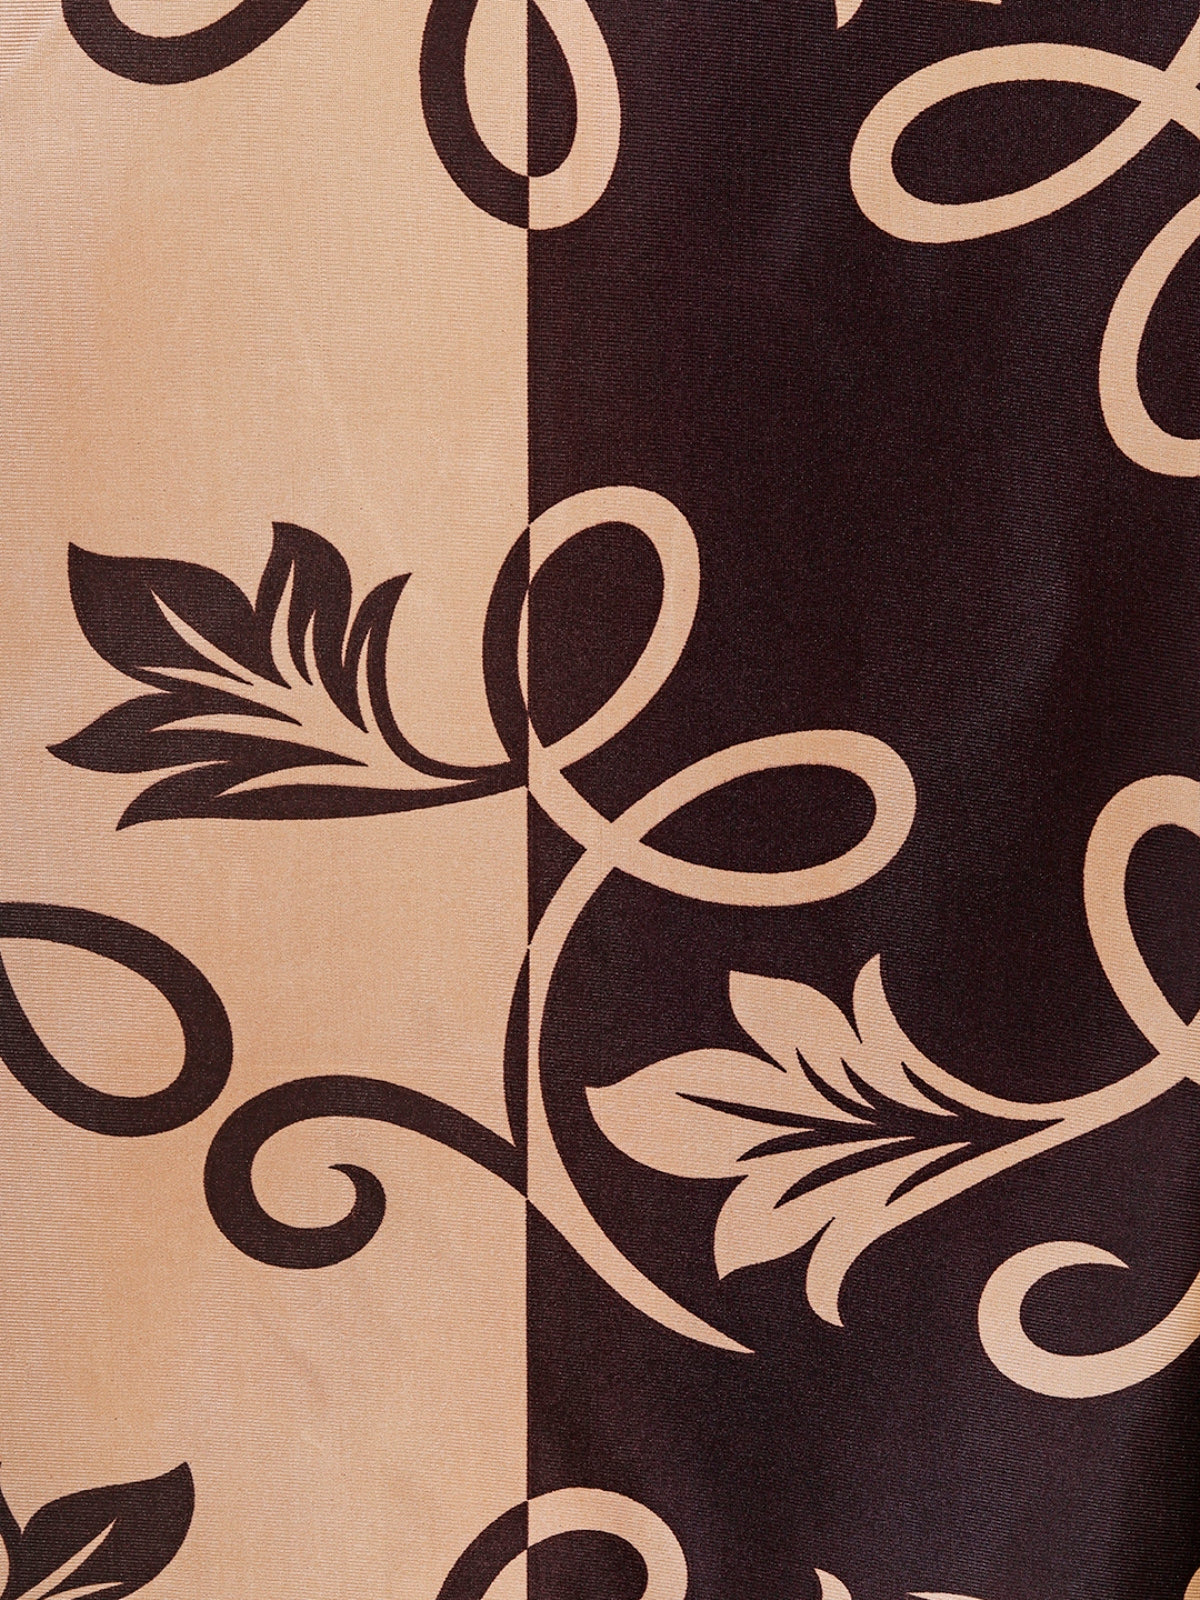 Romee Gold & Brown Floral Patterned Set of 2 Door Curtains